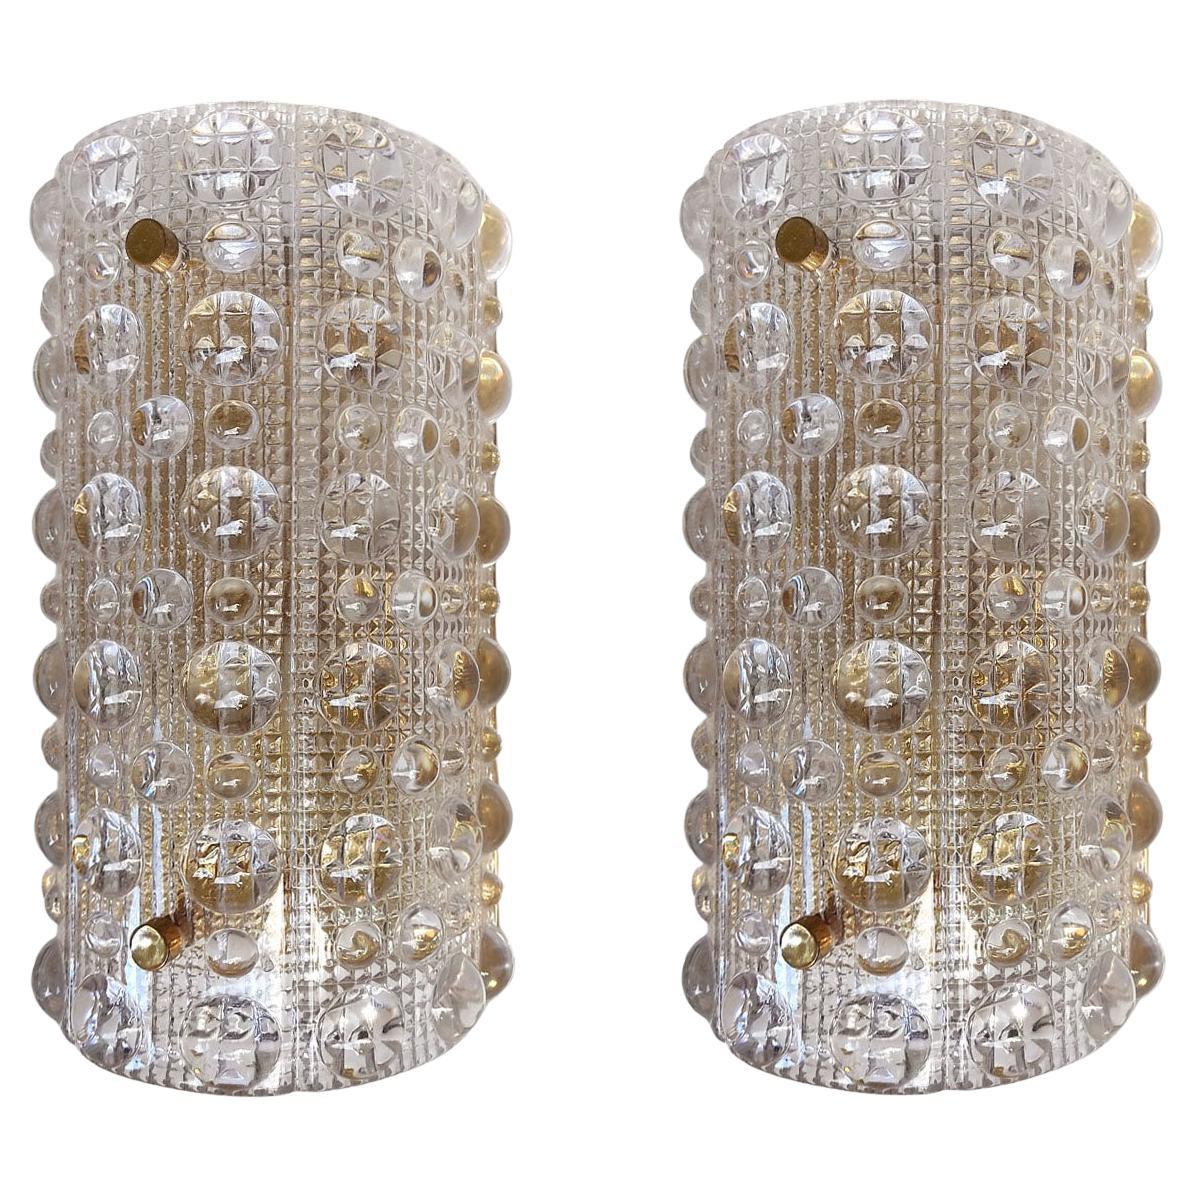 Pair of Large Vintage Crystal Bubble Glass Wall Lights Sconces, 1960s